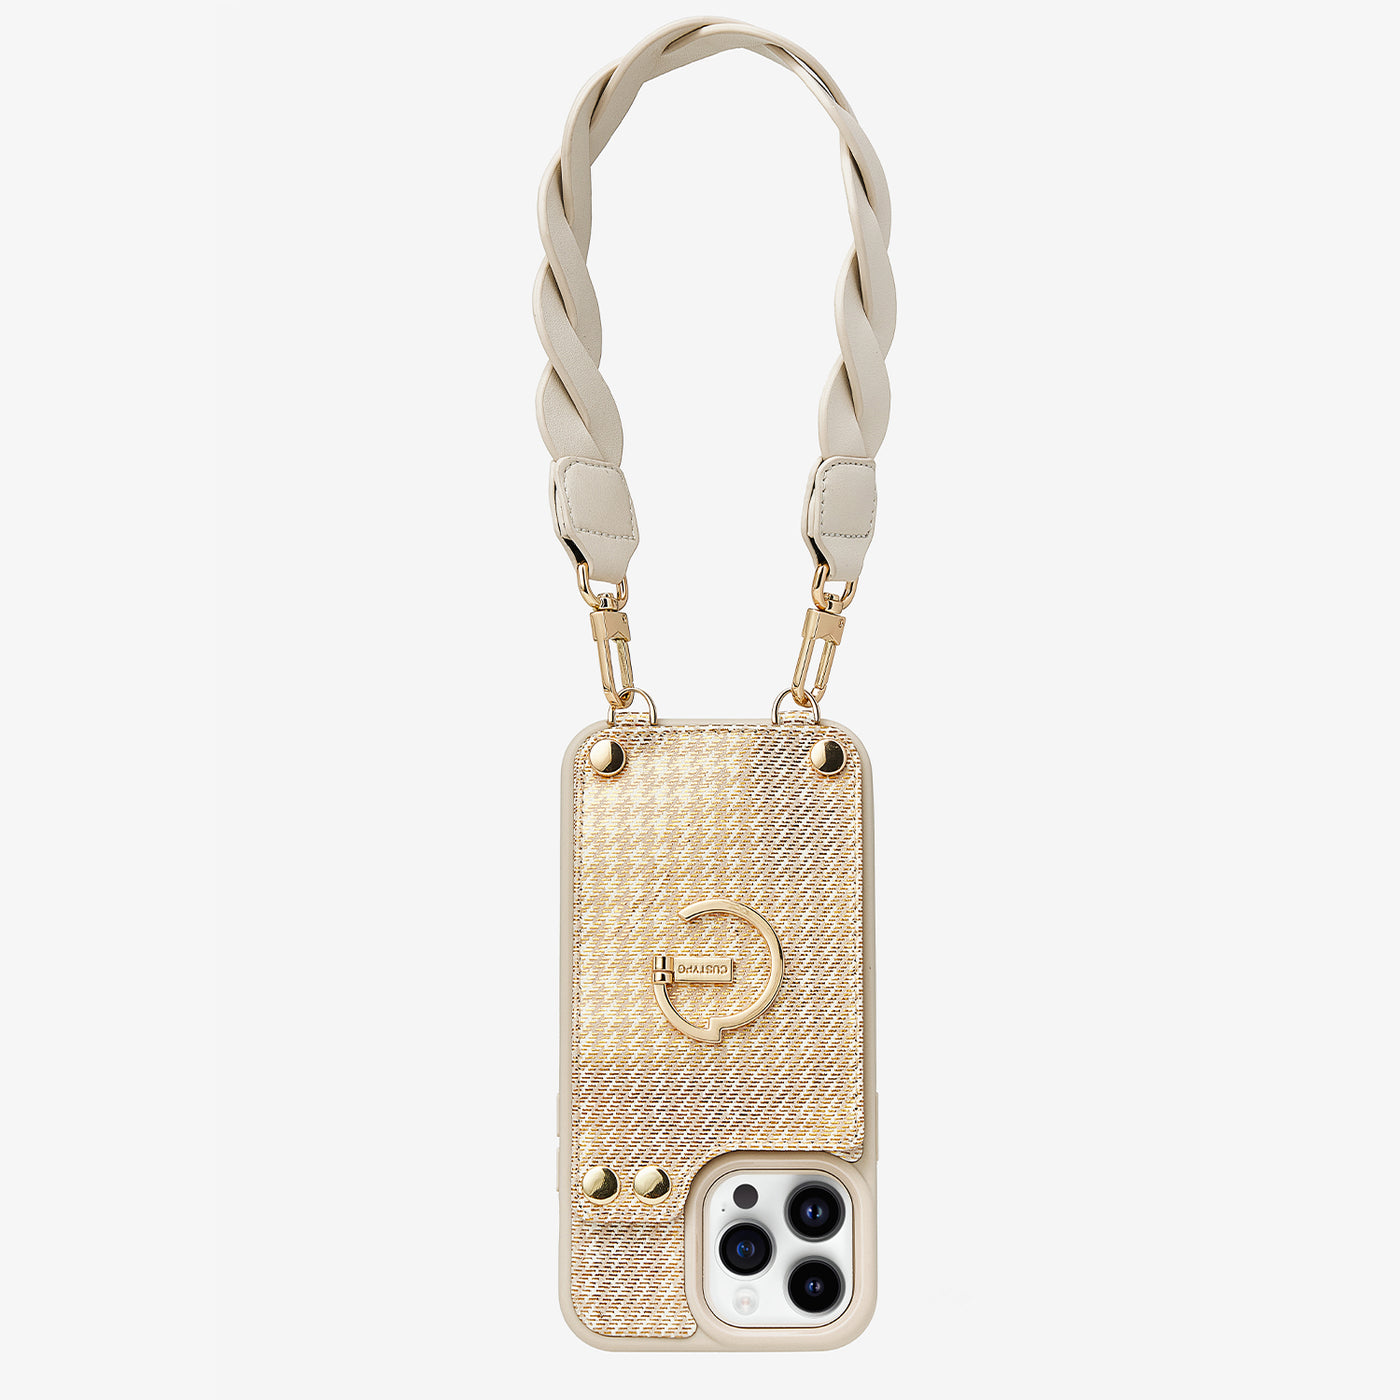 lv leather phone case 14 pro max with chain